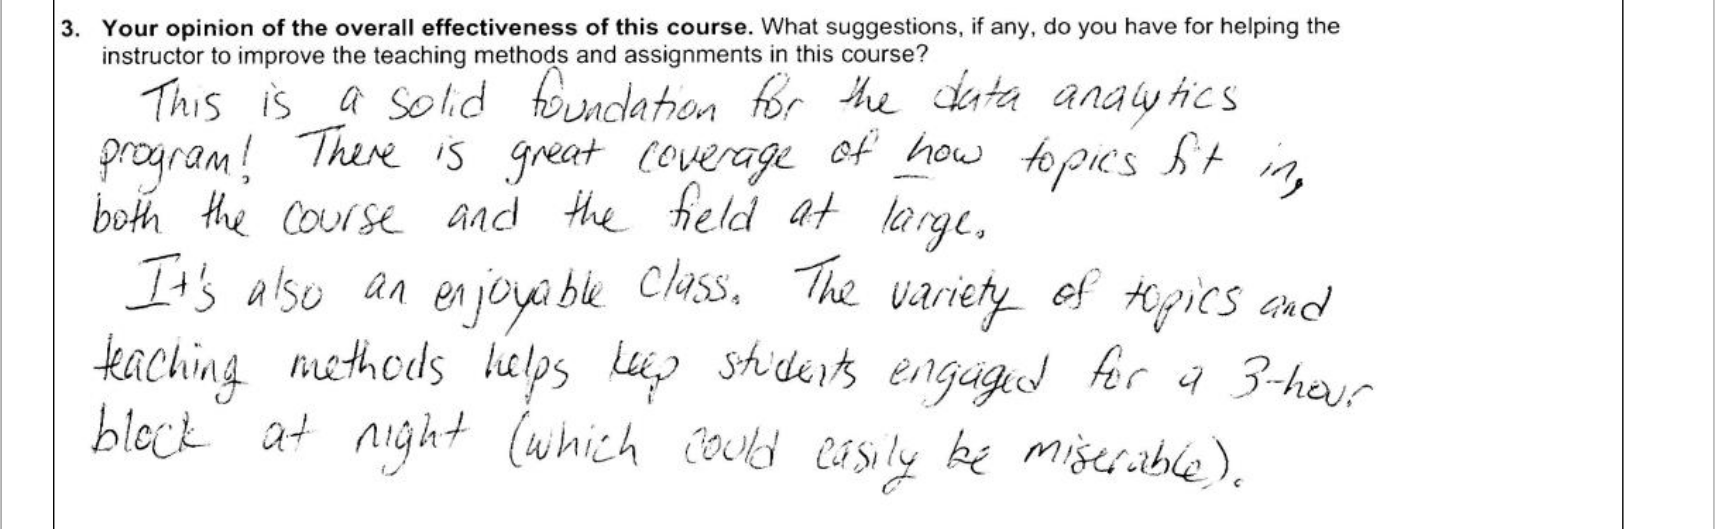 student opinion survey feedback annotation